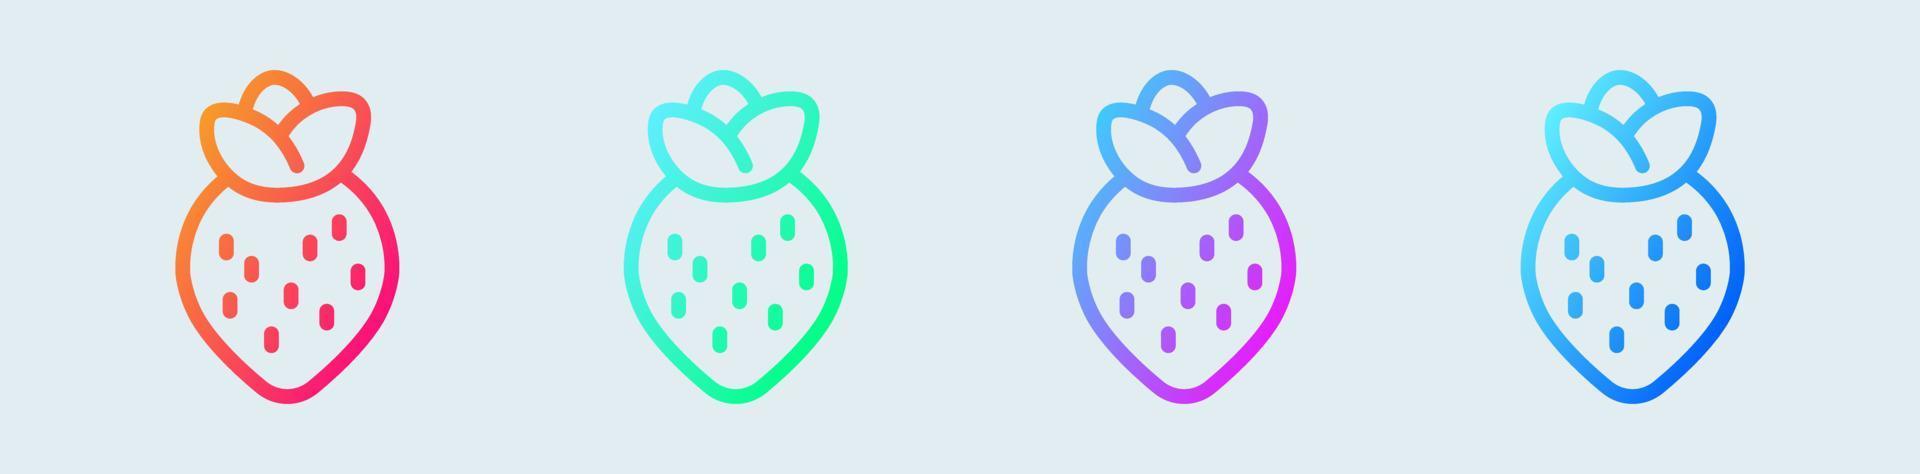 Strawberry line icon in gradient colors. Fruit signs vector illustration.